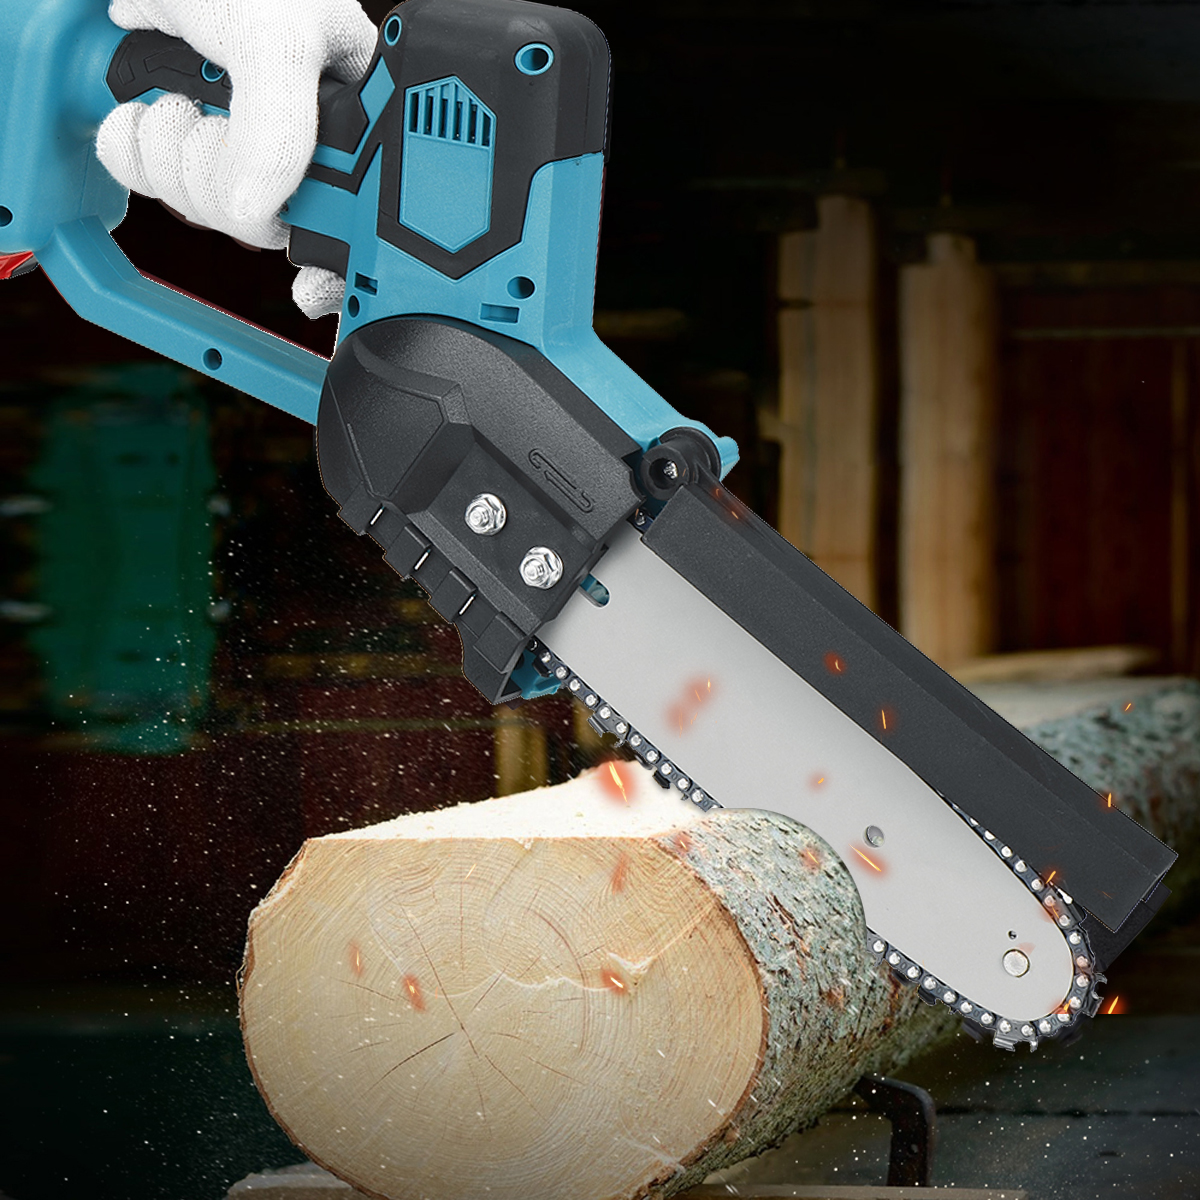 8Inch-21V-Cordless-Electric-Chain-Saw-Mini-Wood-Cutter-1200W-One-Hand-Saws-Woodworking-Tool-W-None12-1860320-1